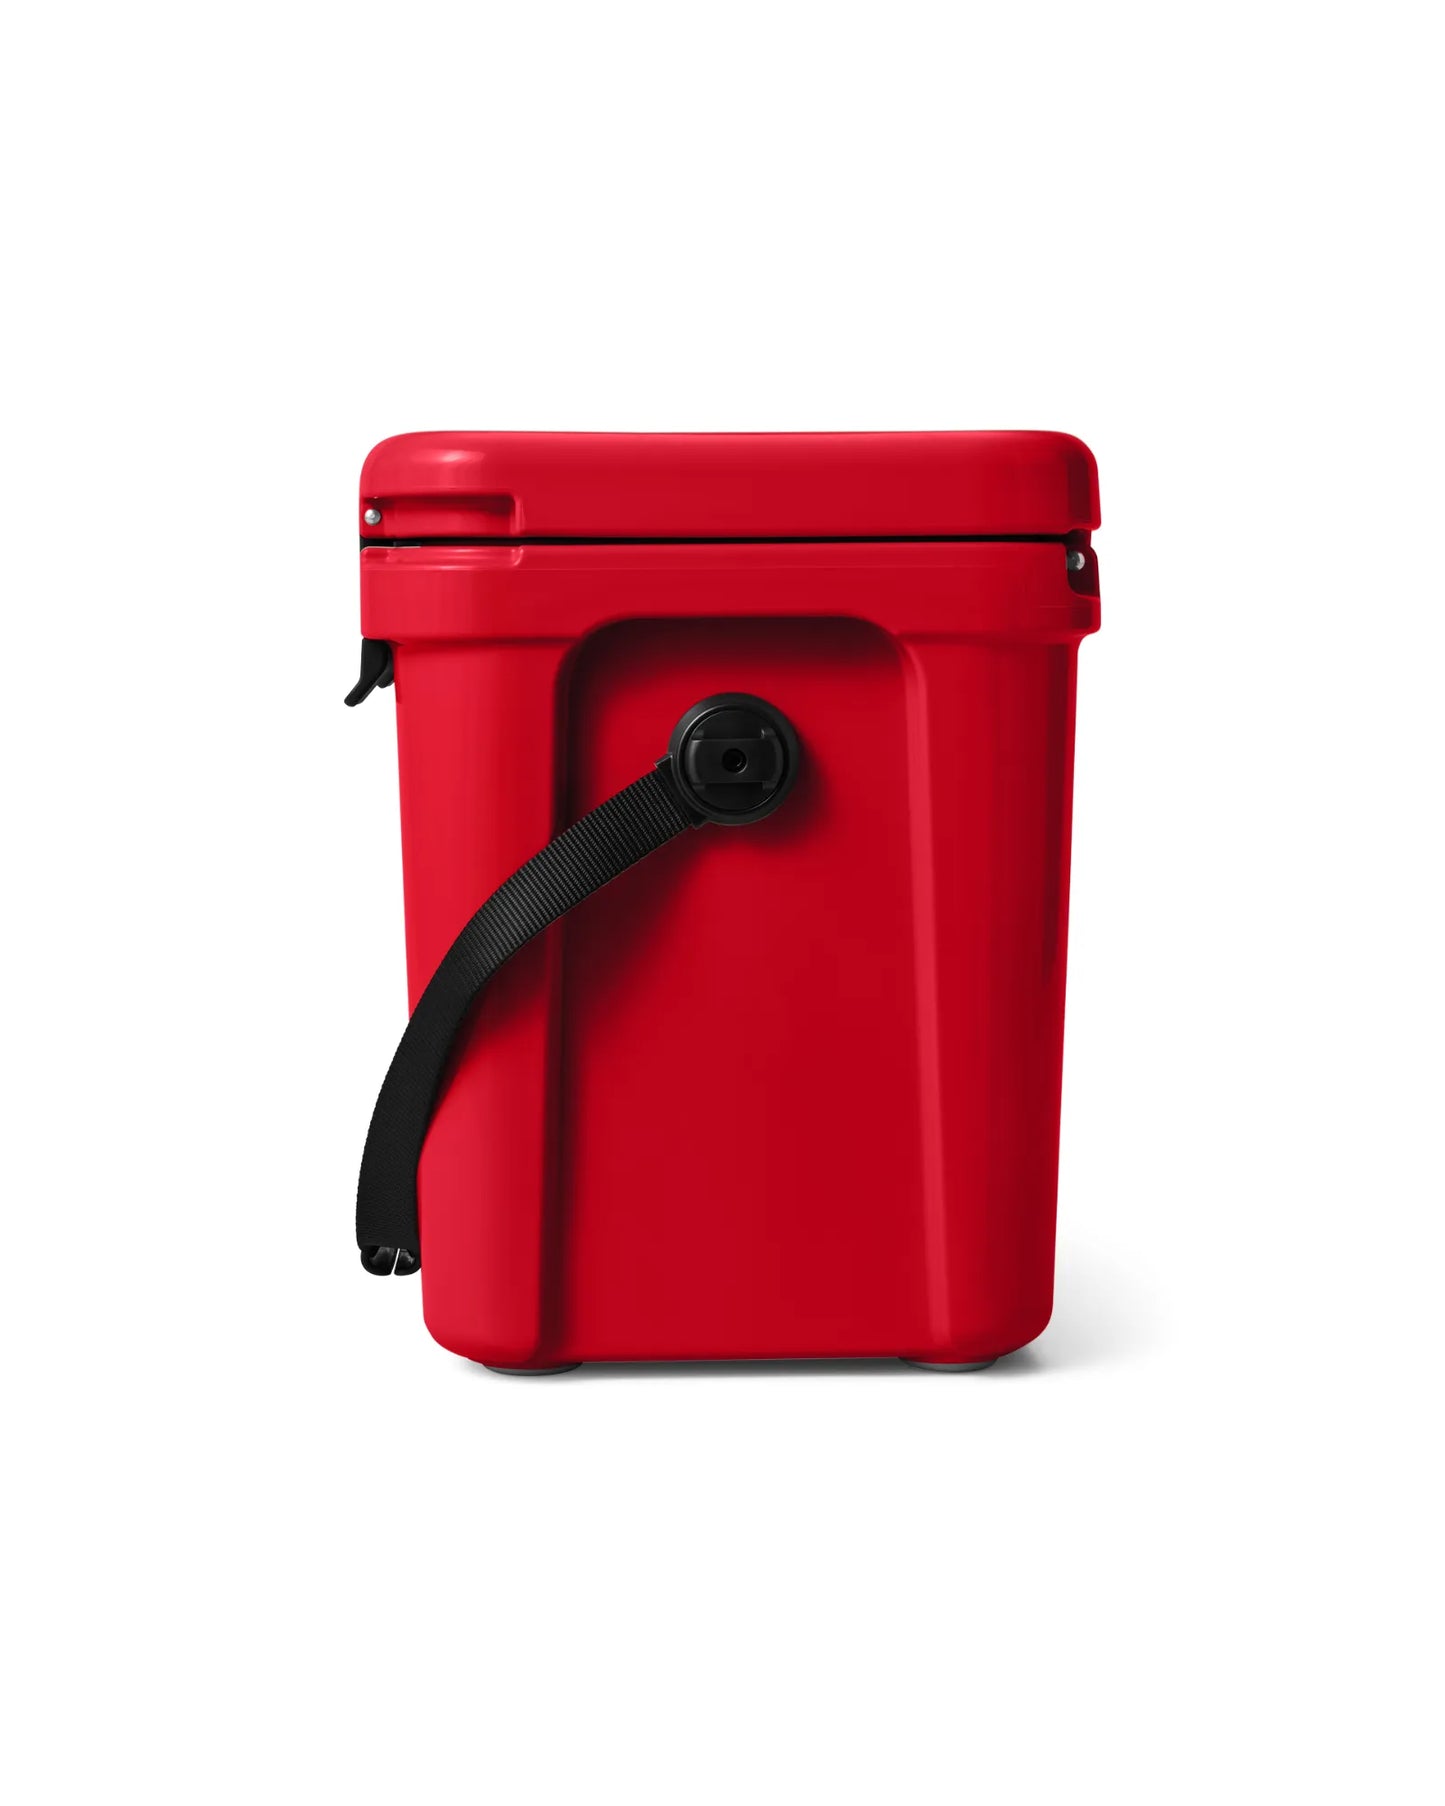 Roadie 24 Cool Box - Rescue Red